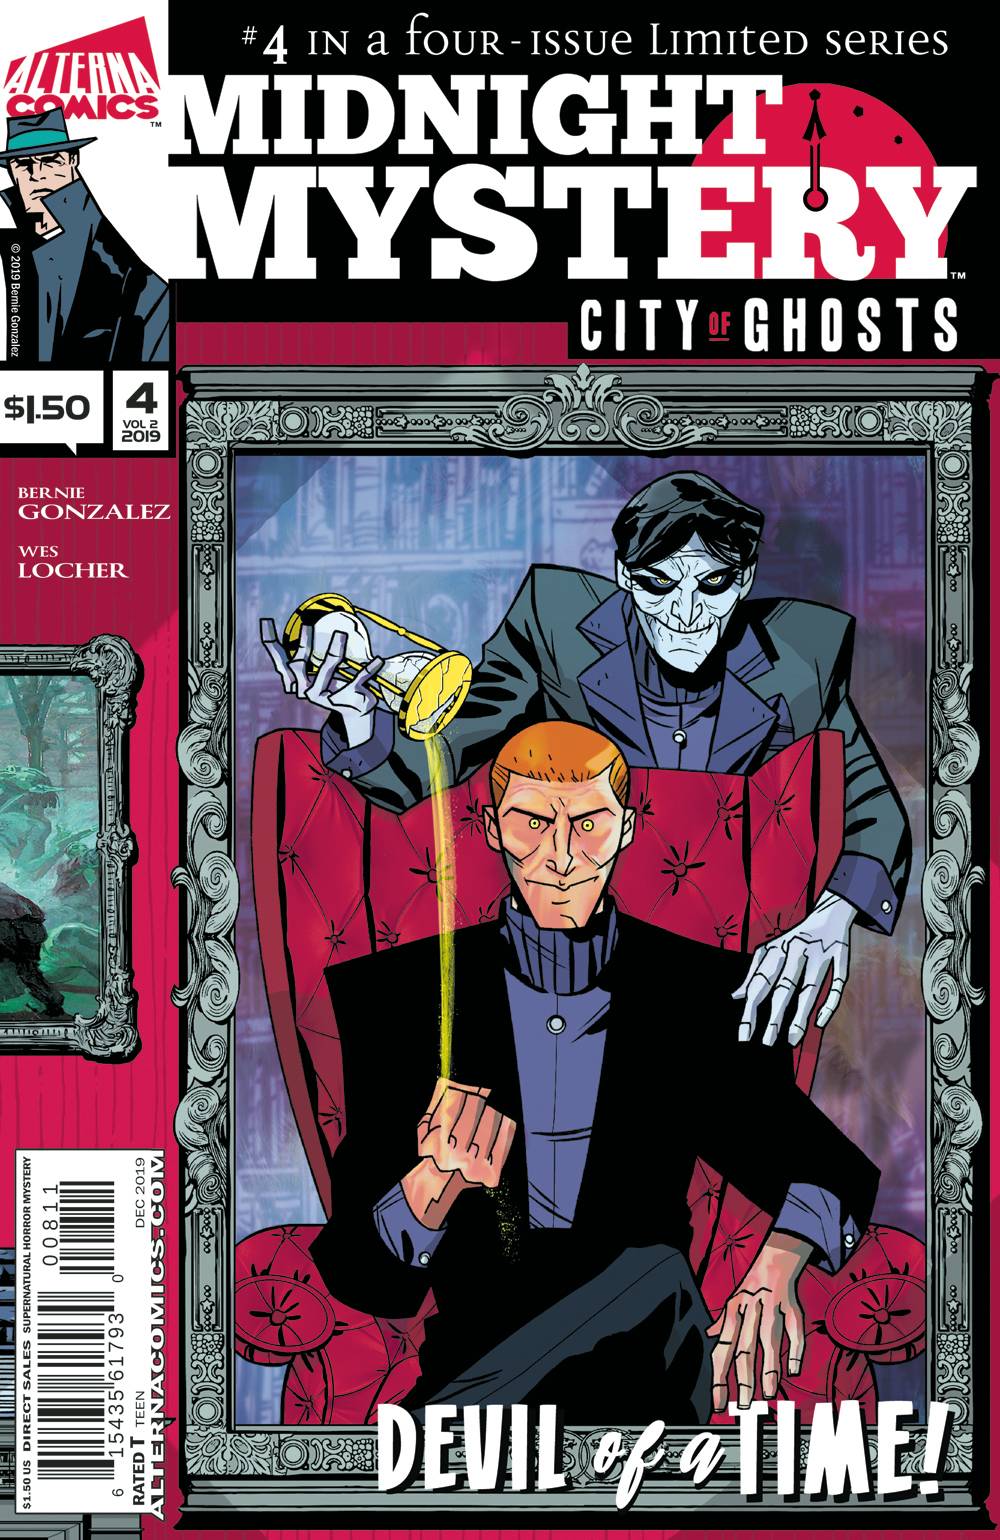 MIDNIGHT MYSTERY VOL 2 CITY OF GHOSTS #4